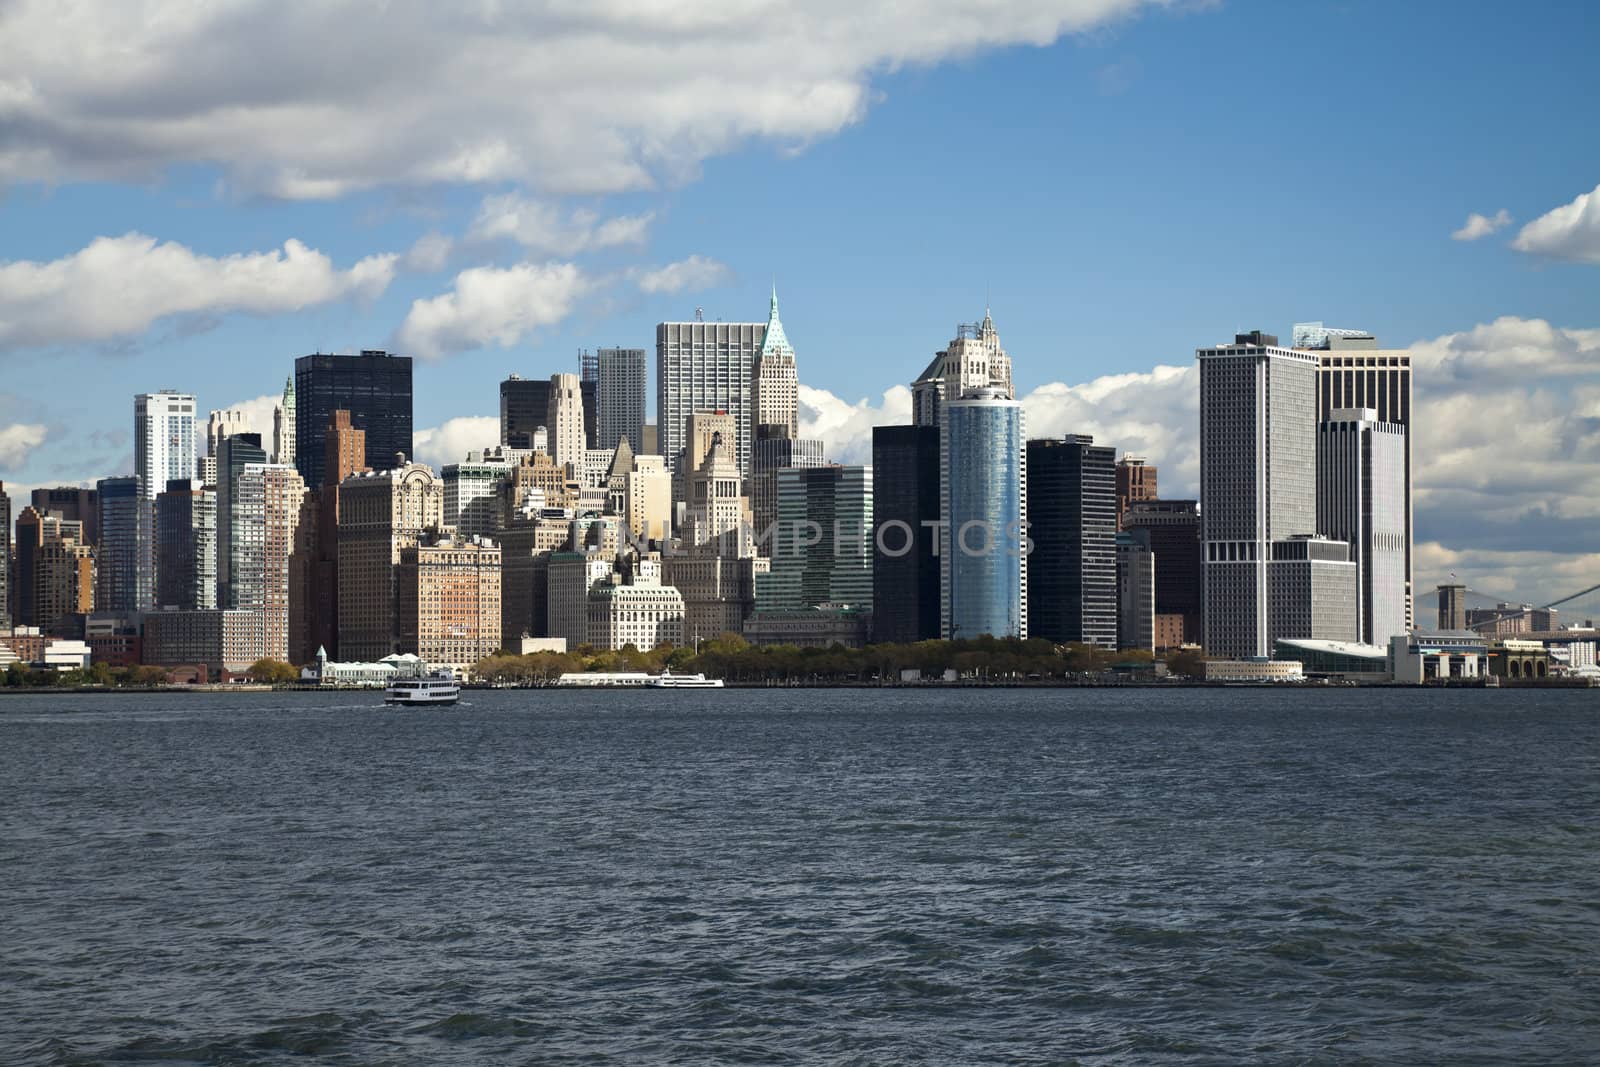 The New York City skyline from the West by hanusst